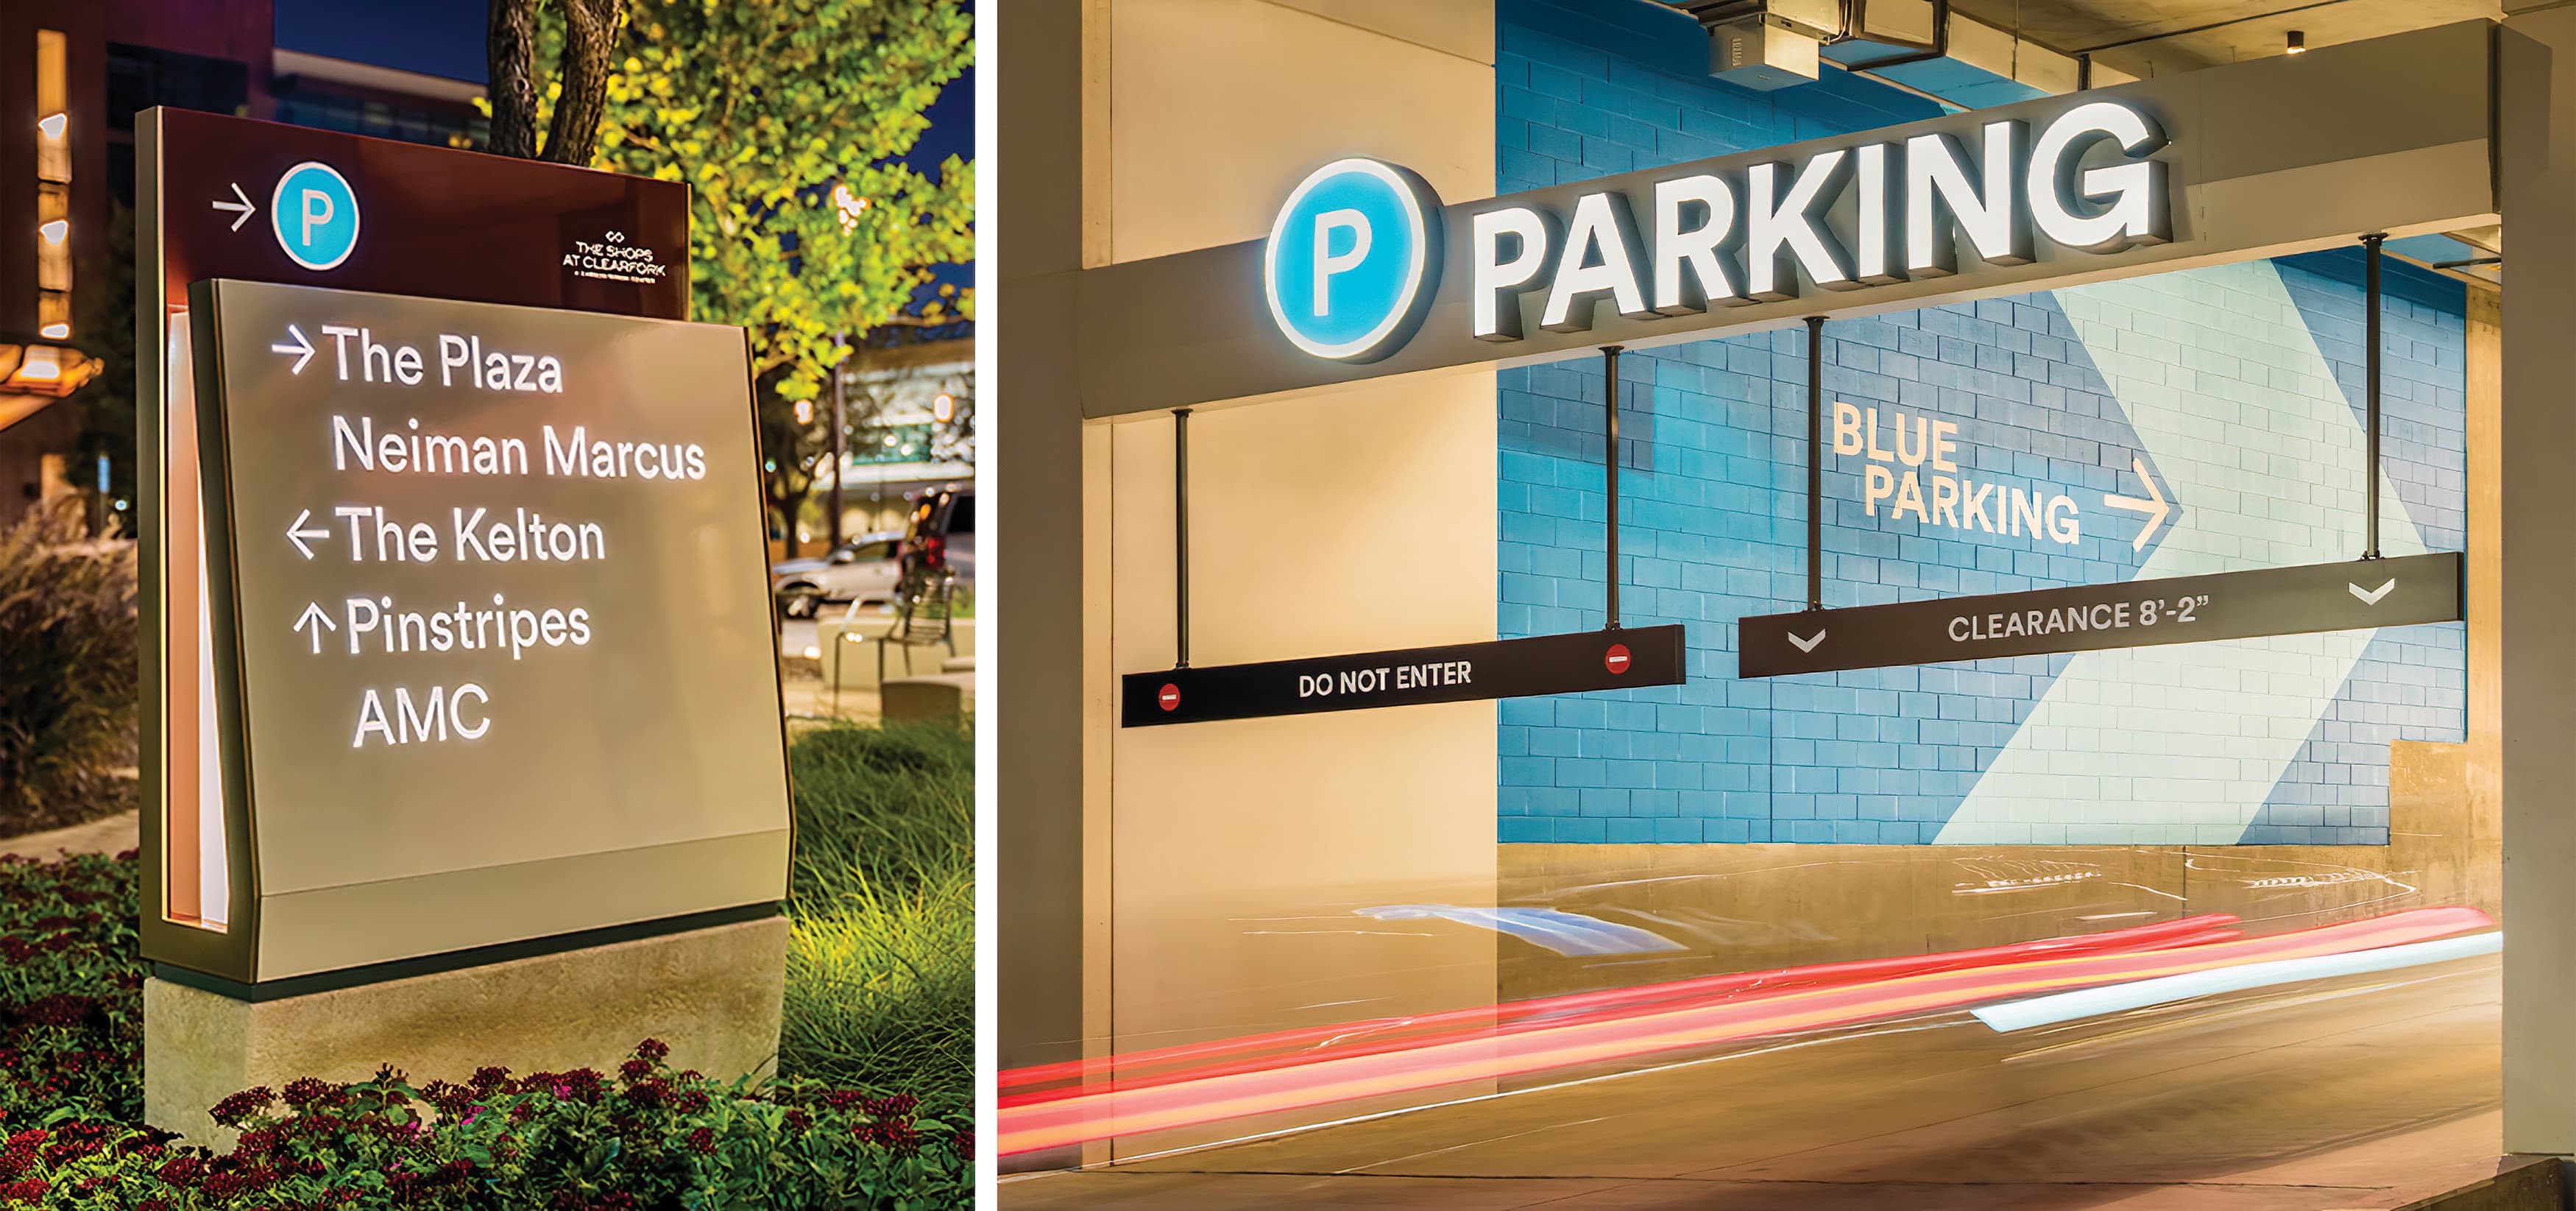 The Shops at Clearfork is an upscale, mixed-use development in the heart of Fort Worth. Vehicular wayfinding design and parking garage signage.